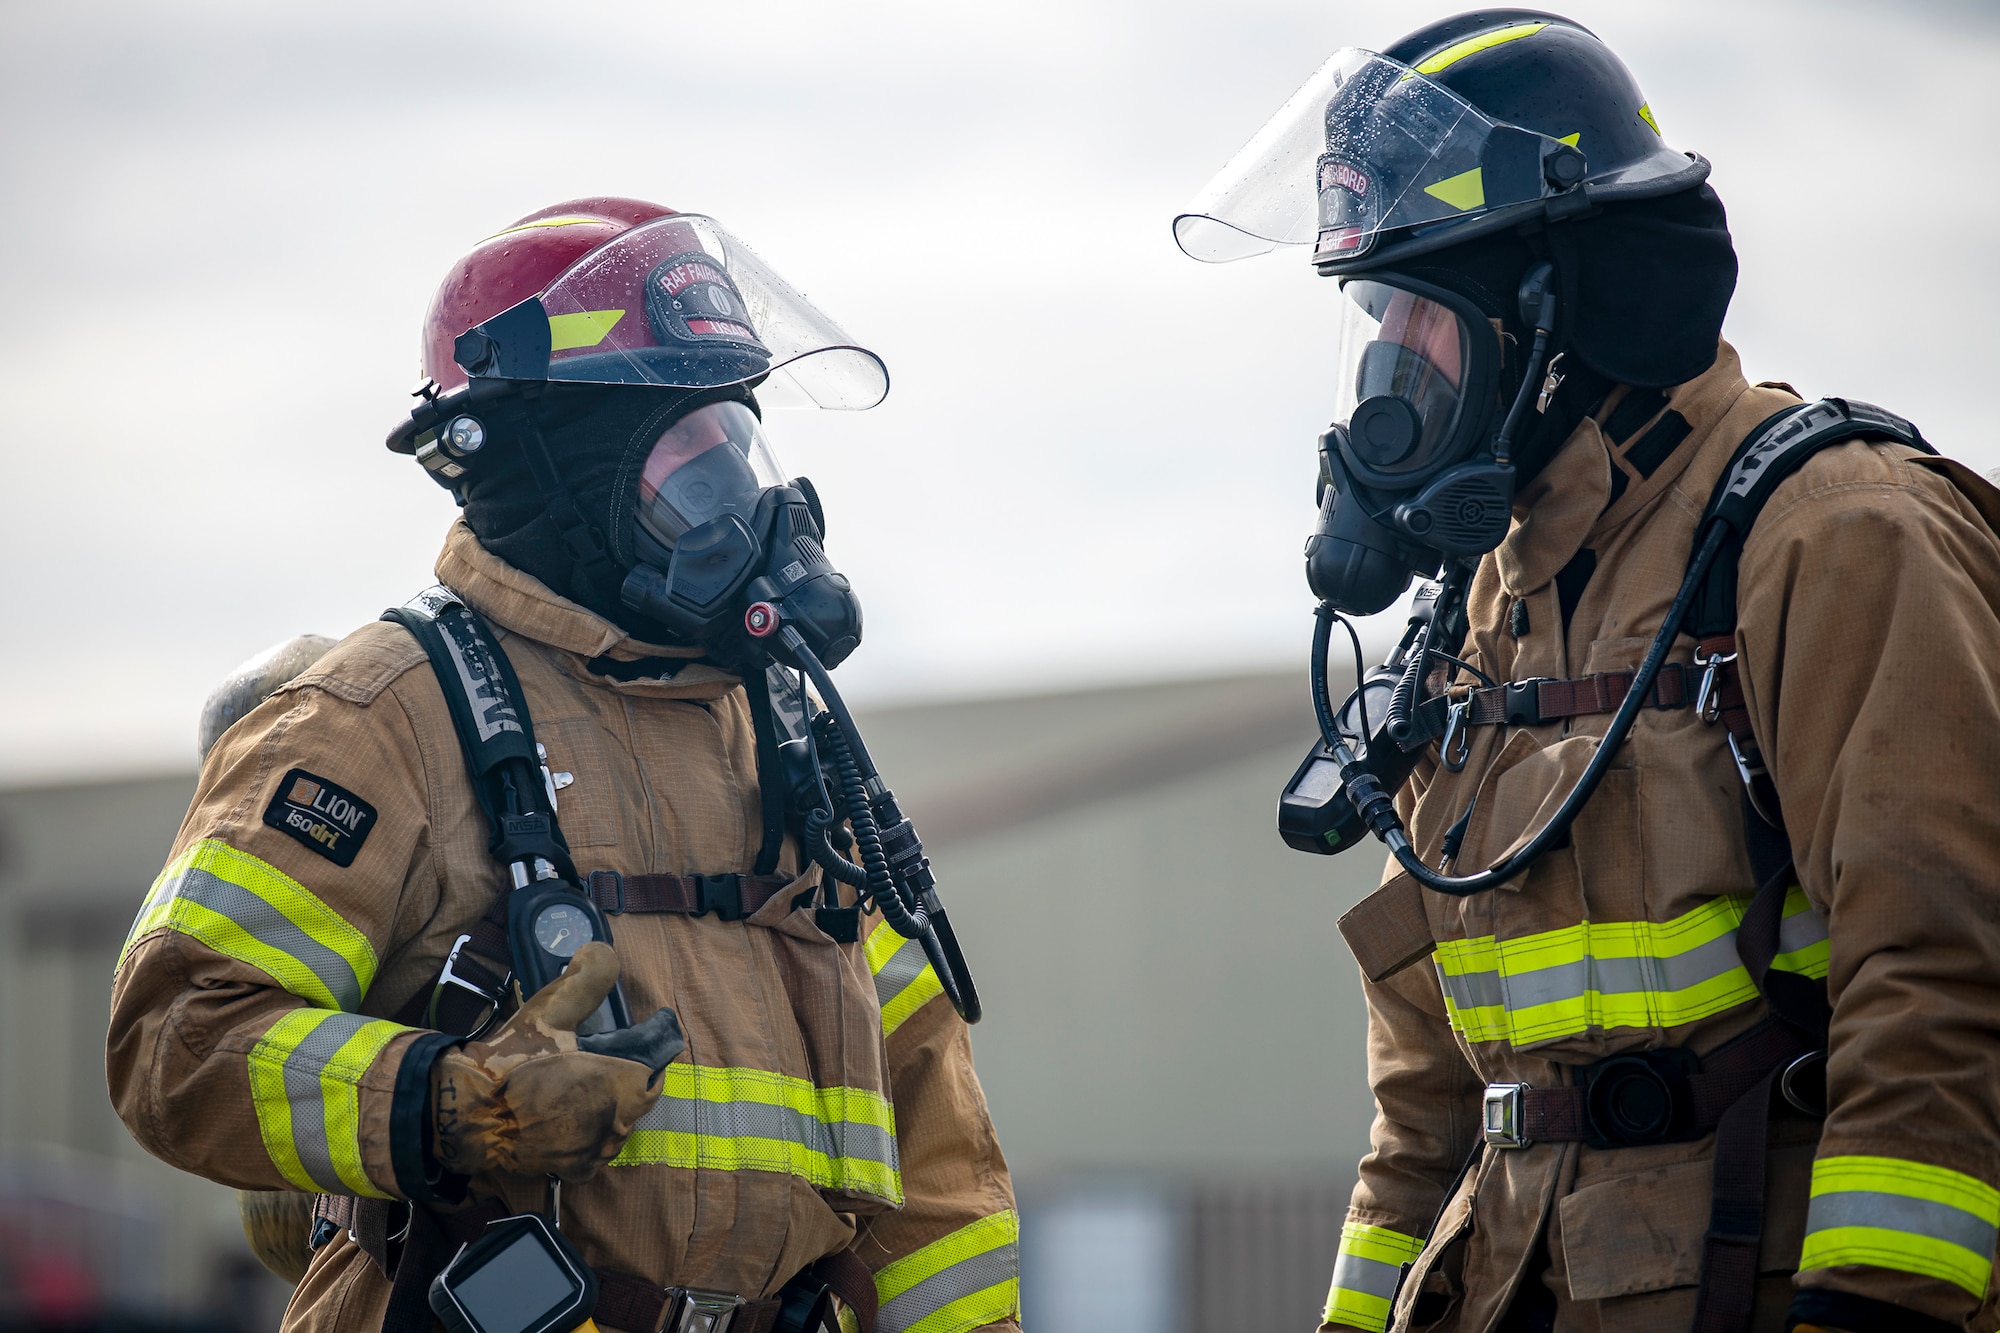 Firefighters from the 422d Fire Emergency Services extinguish an aircraft fire during a live-fire training exercise at RAF Fairford, England, Oct. 3, 2022. Firefighters from the 422d FES are required to complete live-fire training bi-annually to test their overall readiness and ability to properly extinguish an aircraft fire. (U.S. Air Force photo by Staff Sgt. Eugene Oliver)